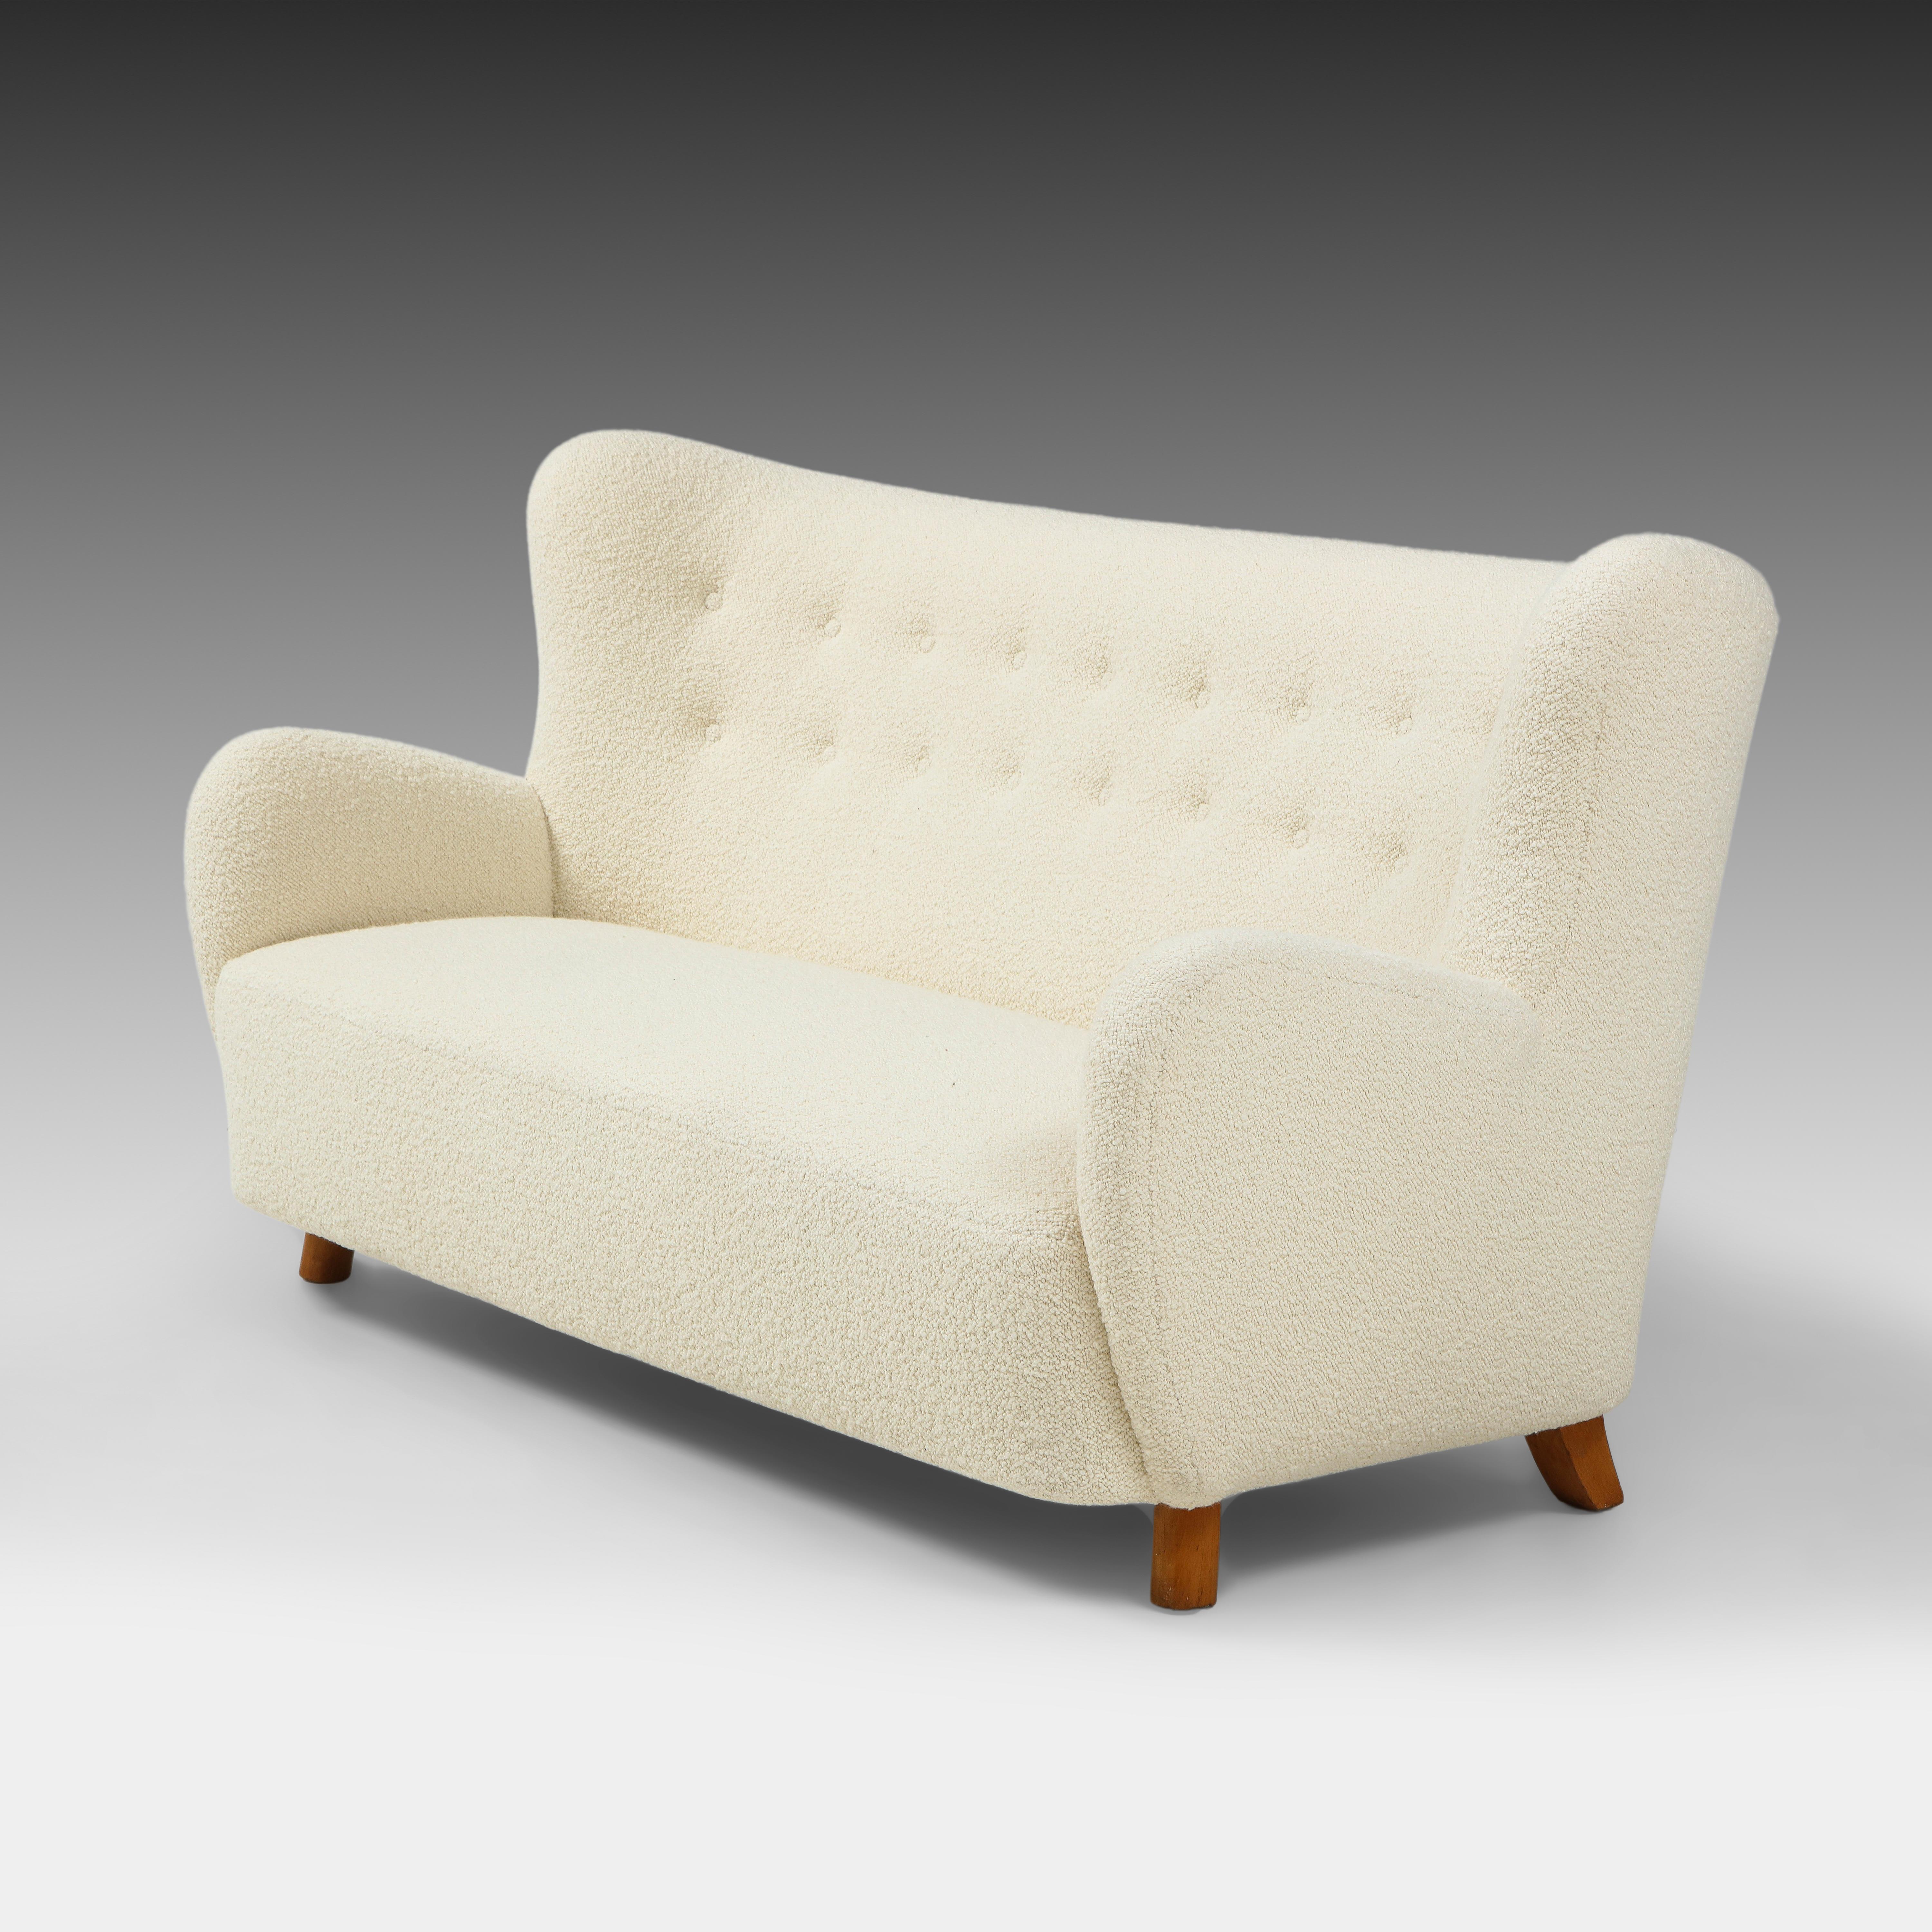 Mogens Lassen rare beautiful Scandinavian Modern sofa in ivory bouclé with slightly curved and tufted wingback and curved armrests on bowed stained beechwood legs. This iconic 1940s Danish modernist sofa is a rare model built with impeccable